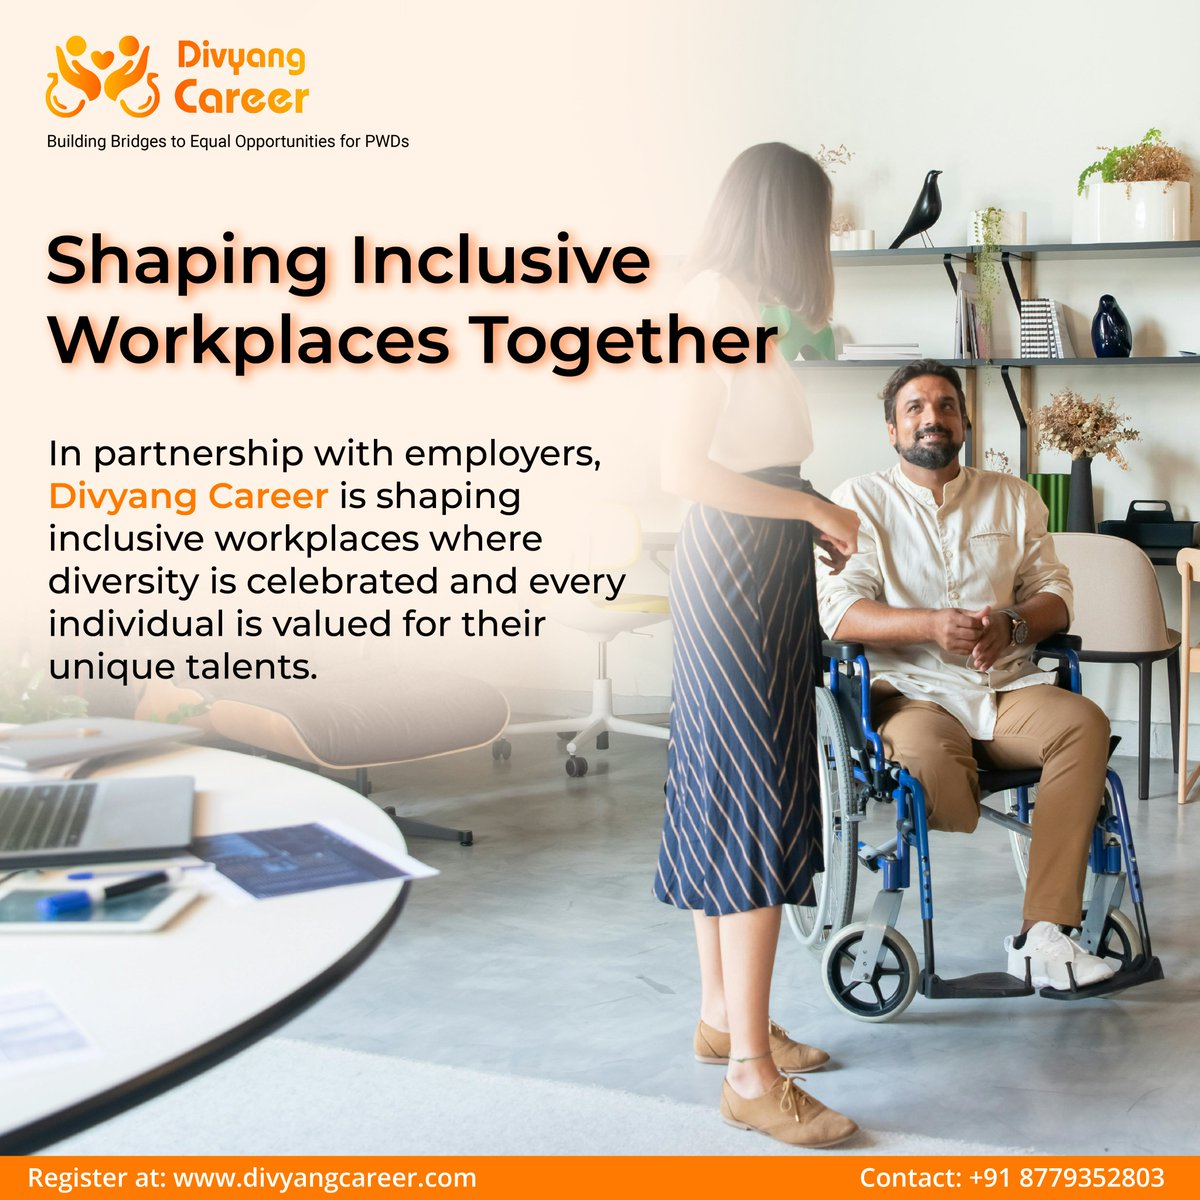 Let's shape workplaces that value unique talents. Together, we can build truly inclusive workplaces together. 
#pwdjob #careerjobs #jobseekers #Unemployed #CareerGoals #careeropportunities #worktogether #JoinTheCommunity #connectwithus #CareerGrowth #talent #PWD #divyangcareer